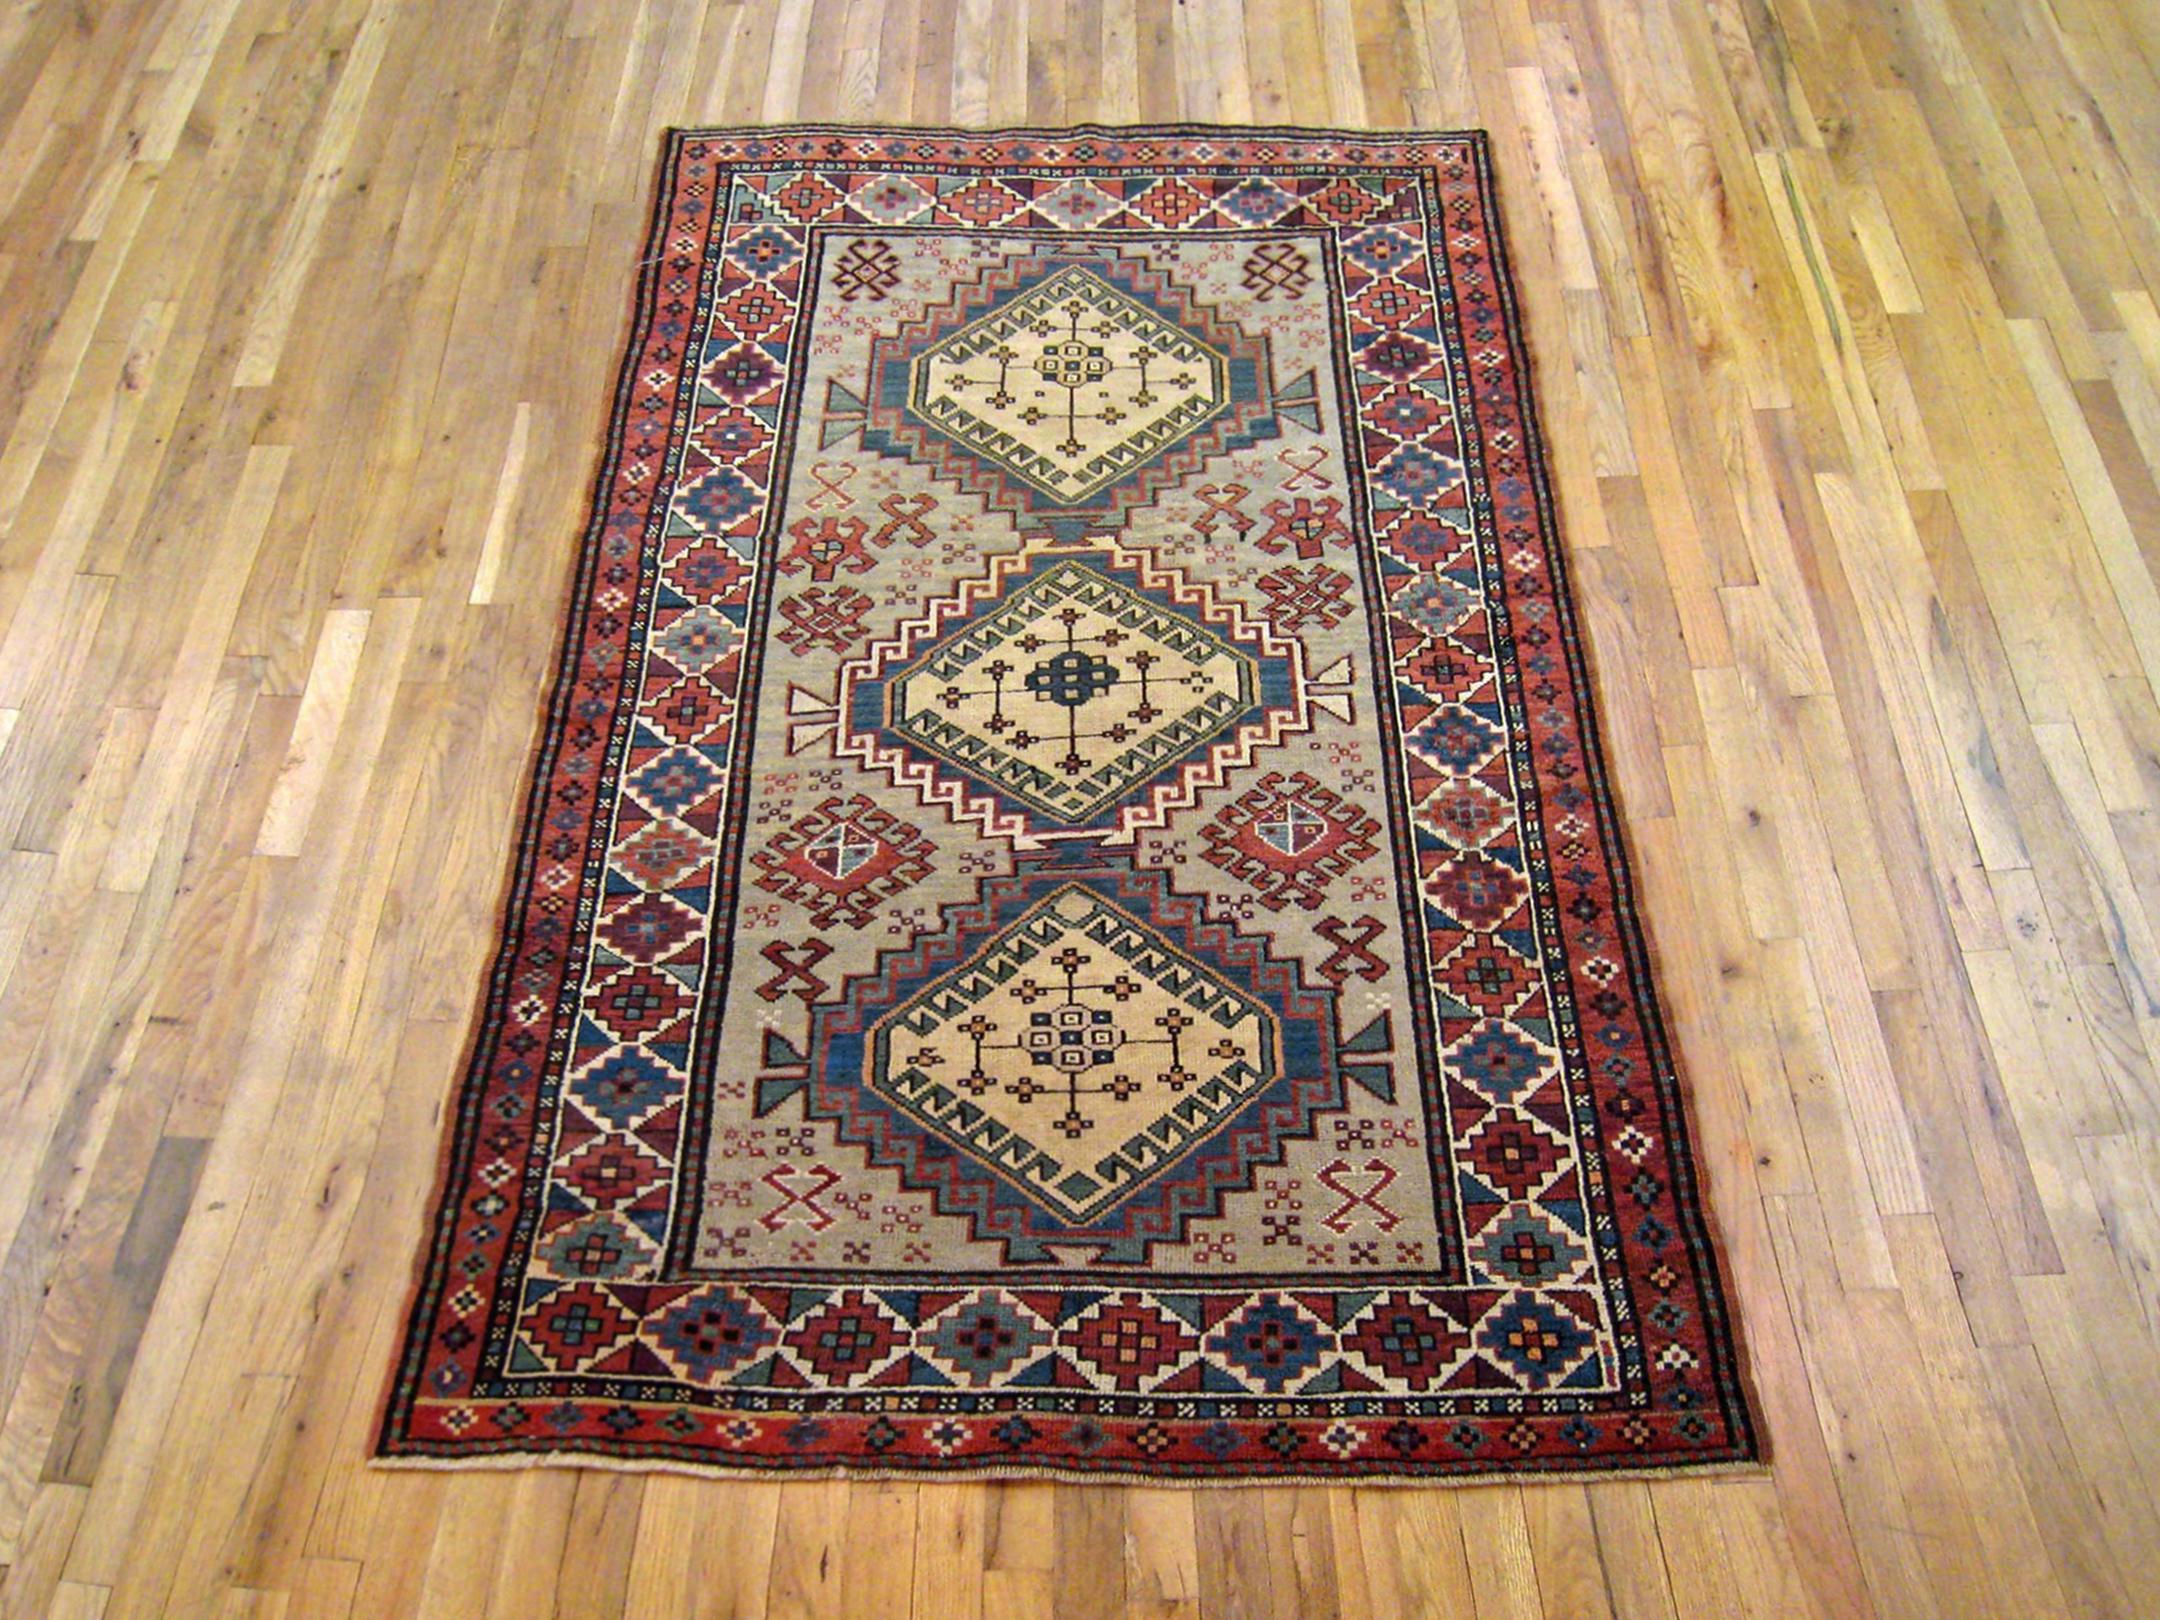 Antique Caucasian Kazak Oriental Carpet, Small size, circa 1900

A one-of-a-kind antique Caucasian Kazak Oriental Carpet, hand-knotted with soft wool pile. This lovely hand-knotted wool rug features three medallions with geometric abstracts on the